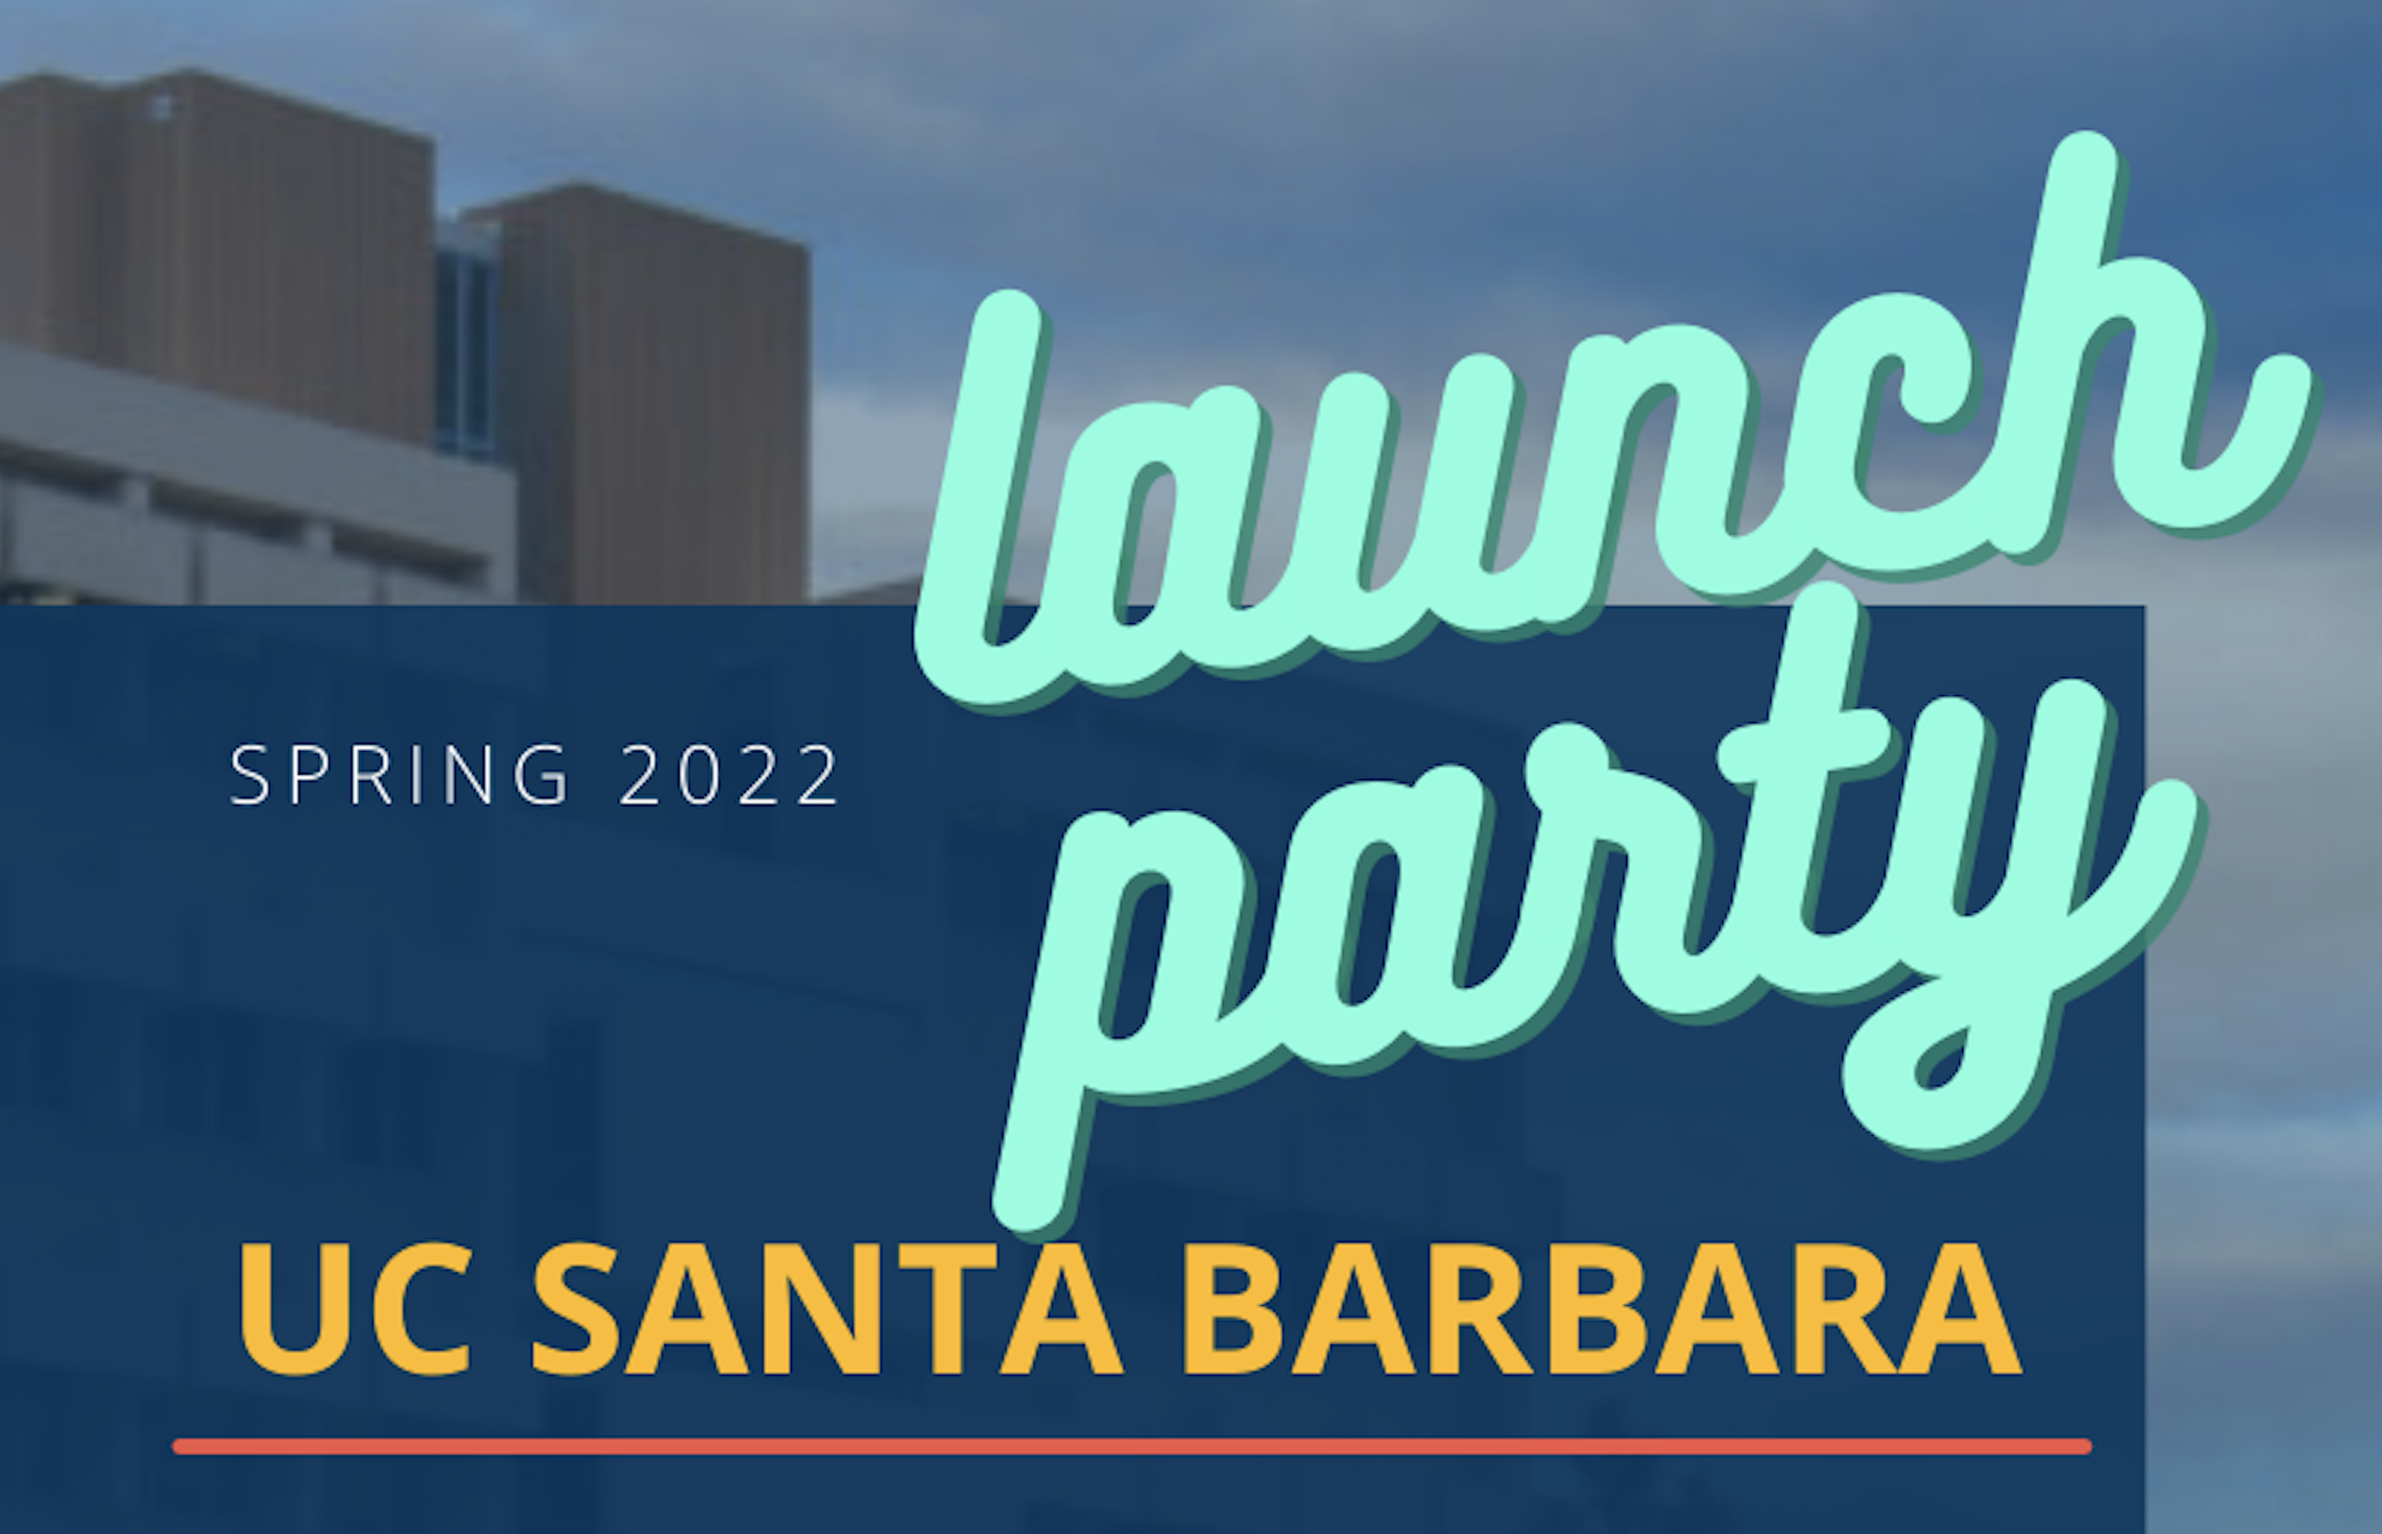 Banner for Spring 2022 UCSB Launch Party